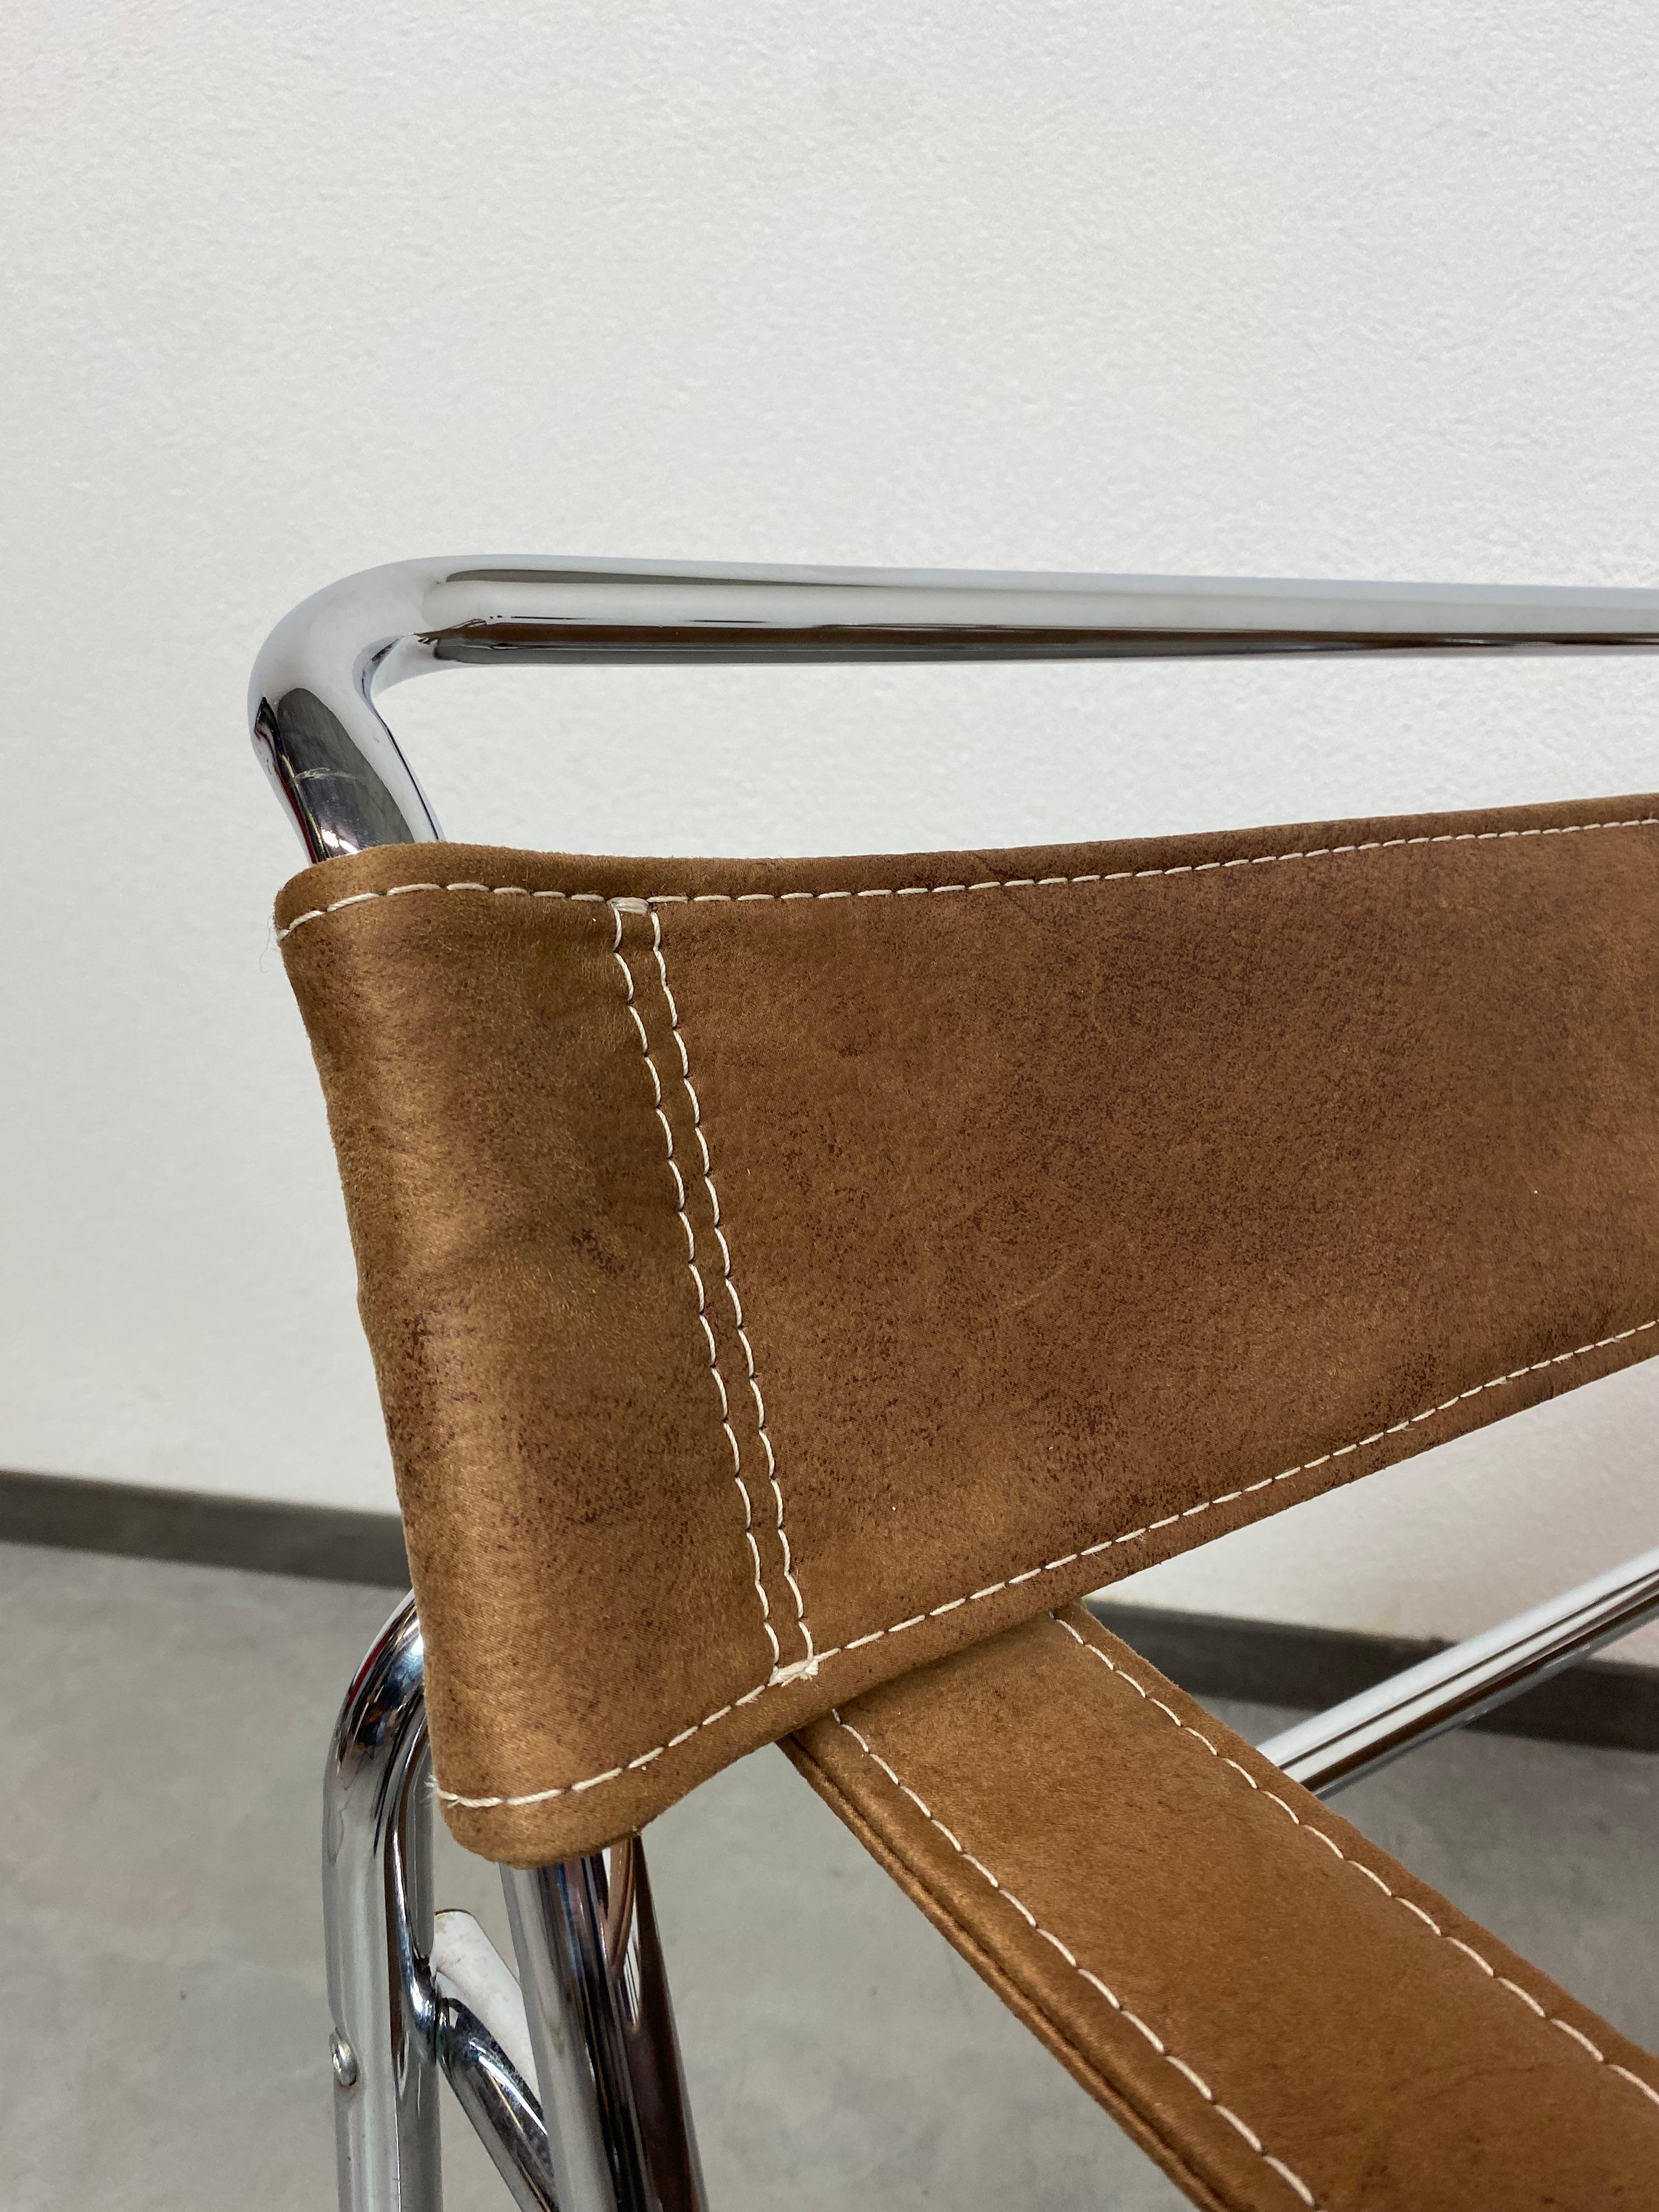 Wassily chair by Marcel Breuer In Excellent Condition For Sale In Banská Štiavnica, SK